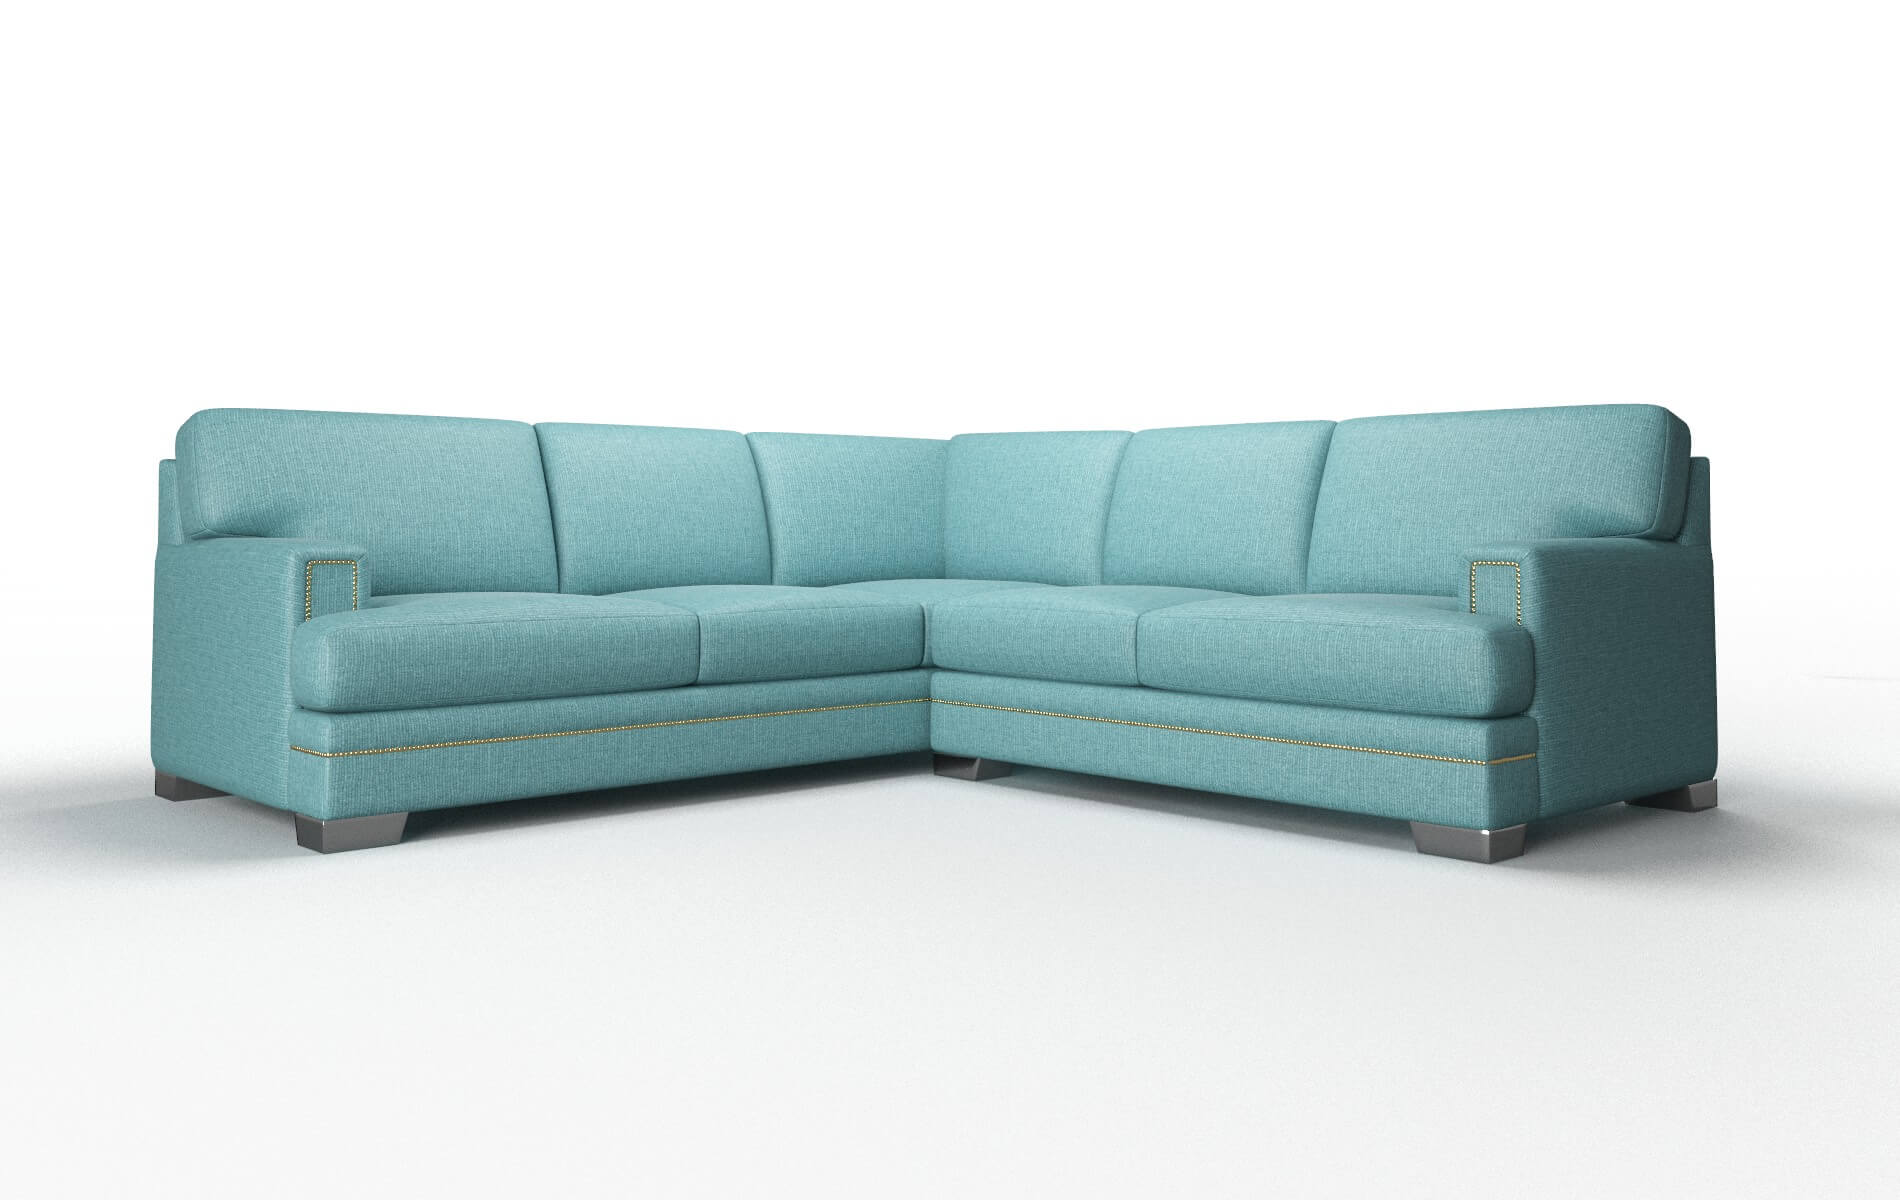 Barcelona Parker Turquoise Sectional metal legs